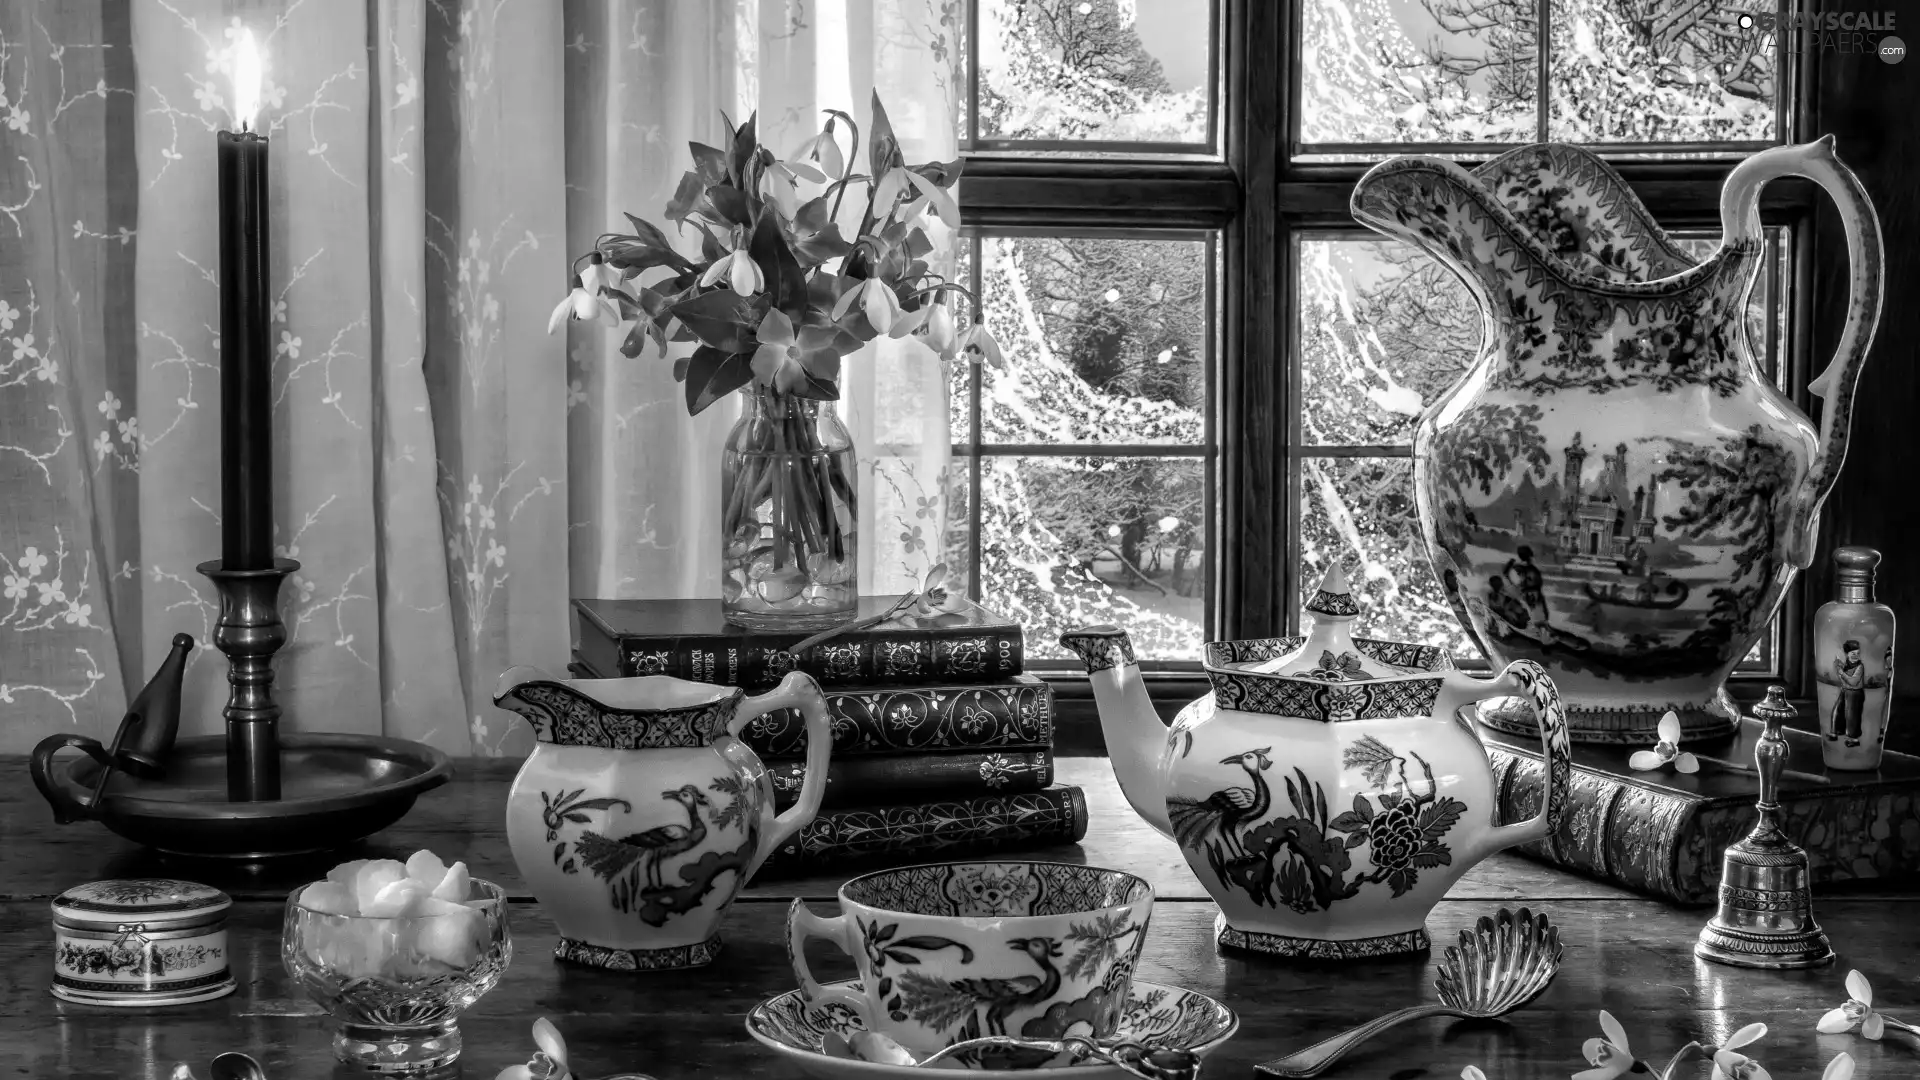 Flowers, porcelain, Books, service, cup, candle, Window, Jugs